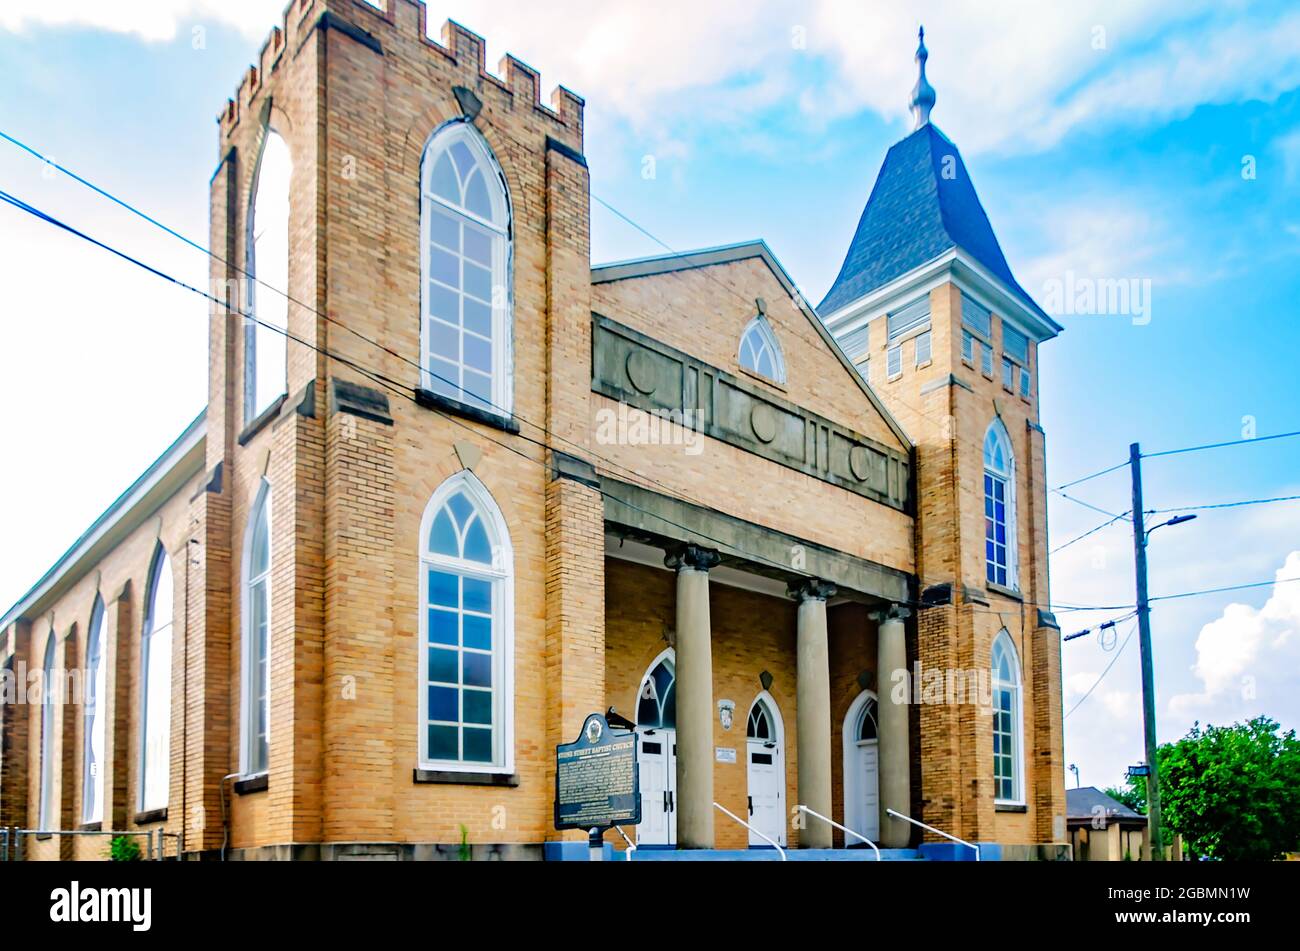 Stone Street Baptist Church is pictured, Aug. 1, 2021, in Mobile, Alabama. The church, also known as The African Church, was organized in 1806. Stock Photo